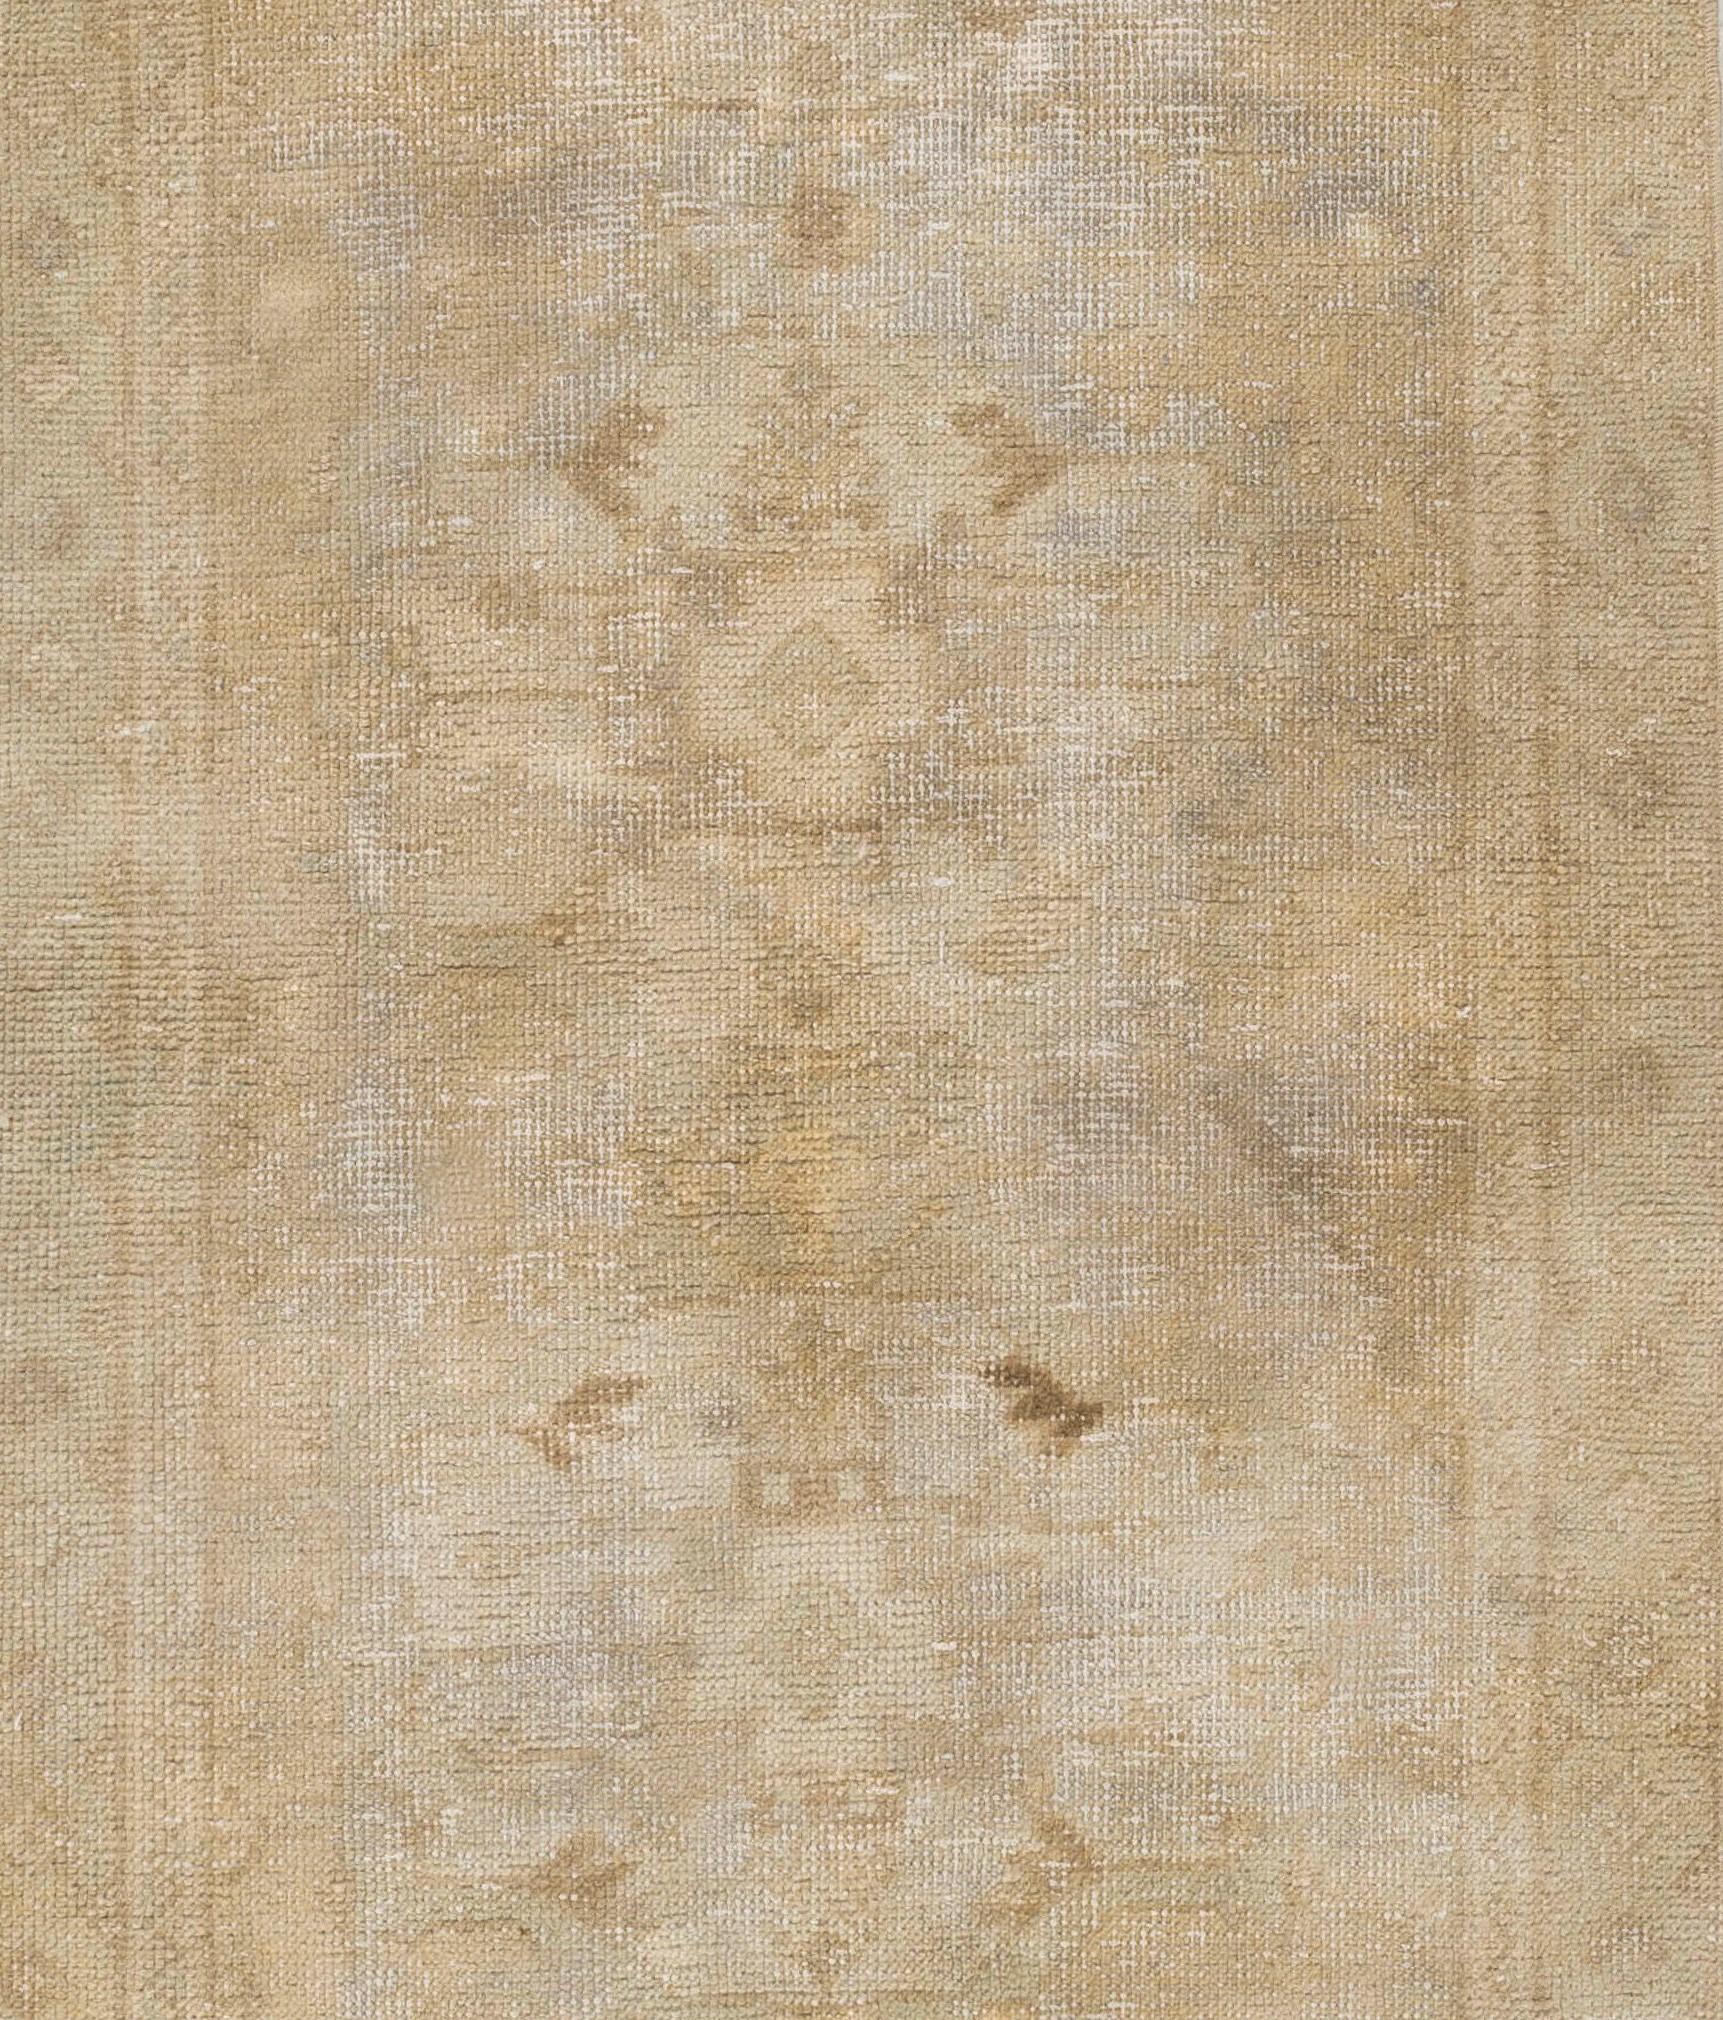 Hand-Knotted 3x8.8 Ft - Antique Turkish Oushak Runner in Neutral Colors. Handknotted Wool Rug